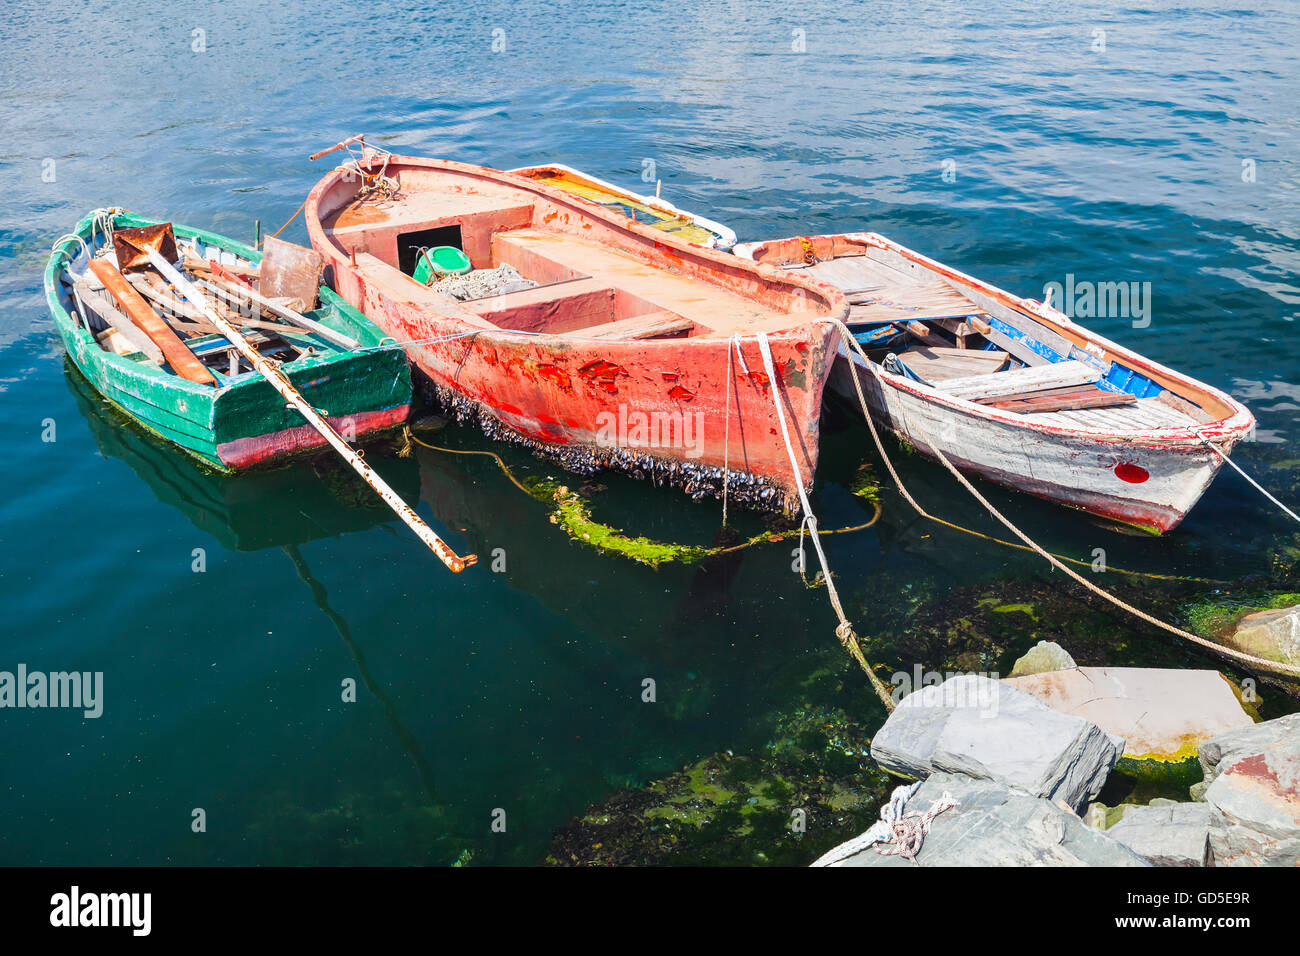 Colorful old wooden fishing boats moored in small port of 